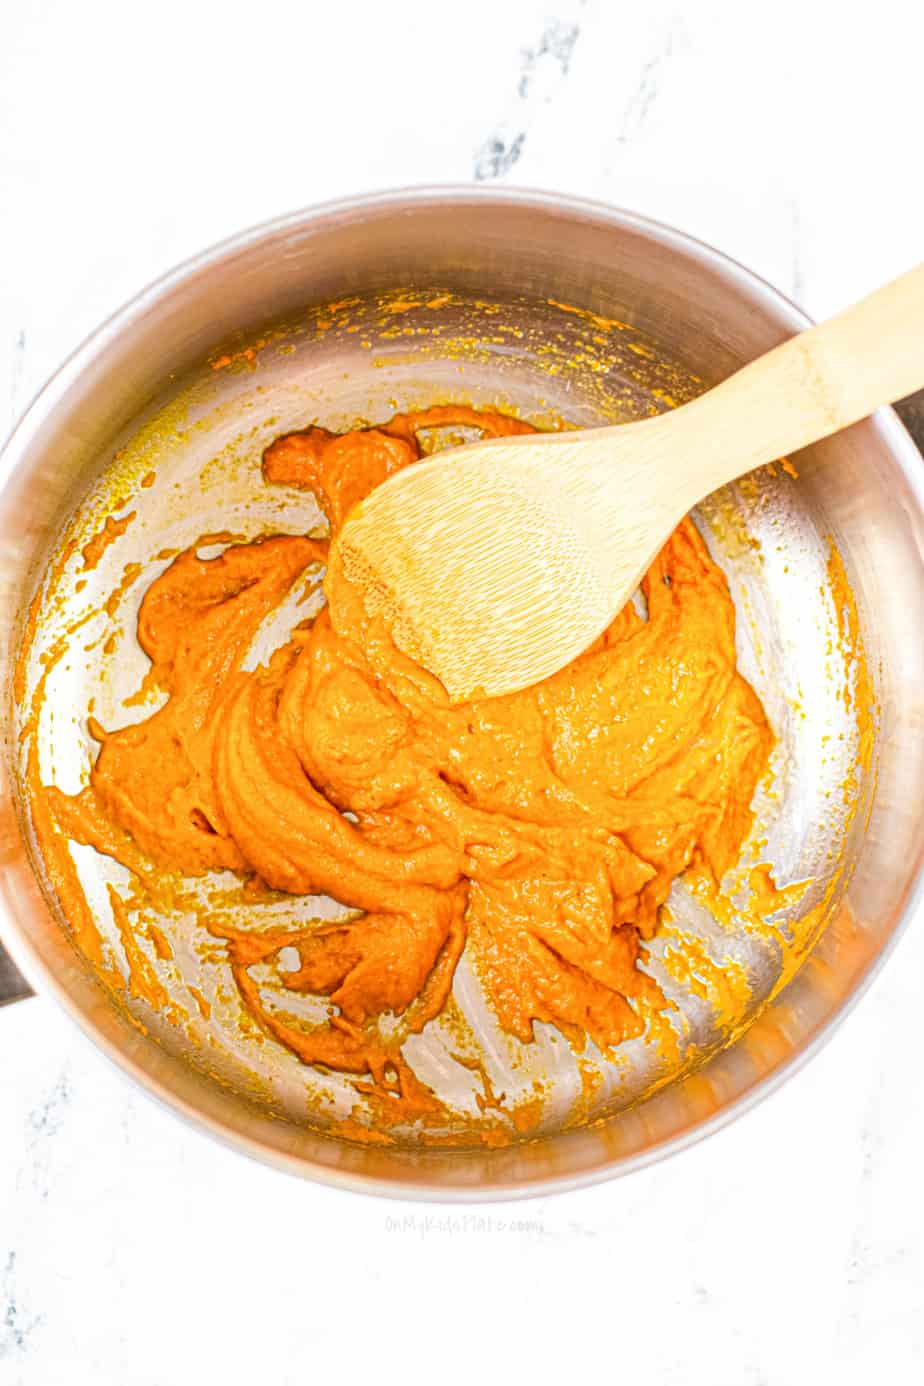 melting butter and pumpkin puree together in a pan